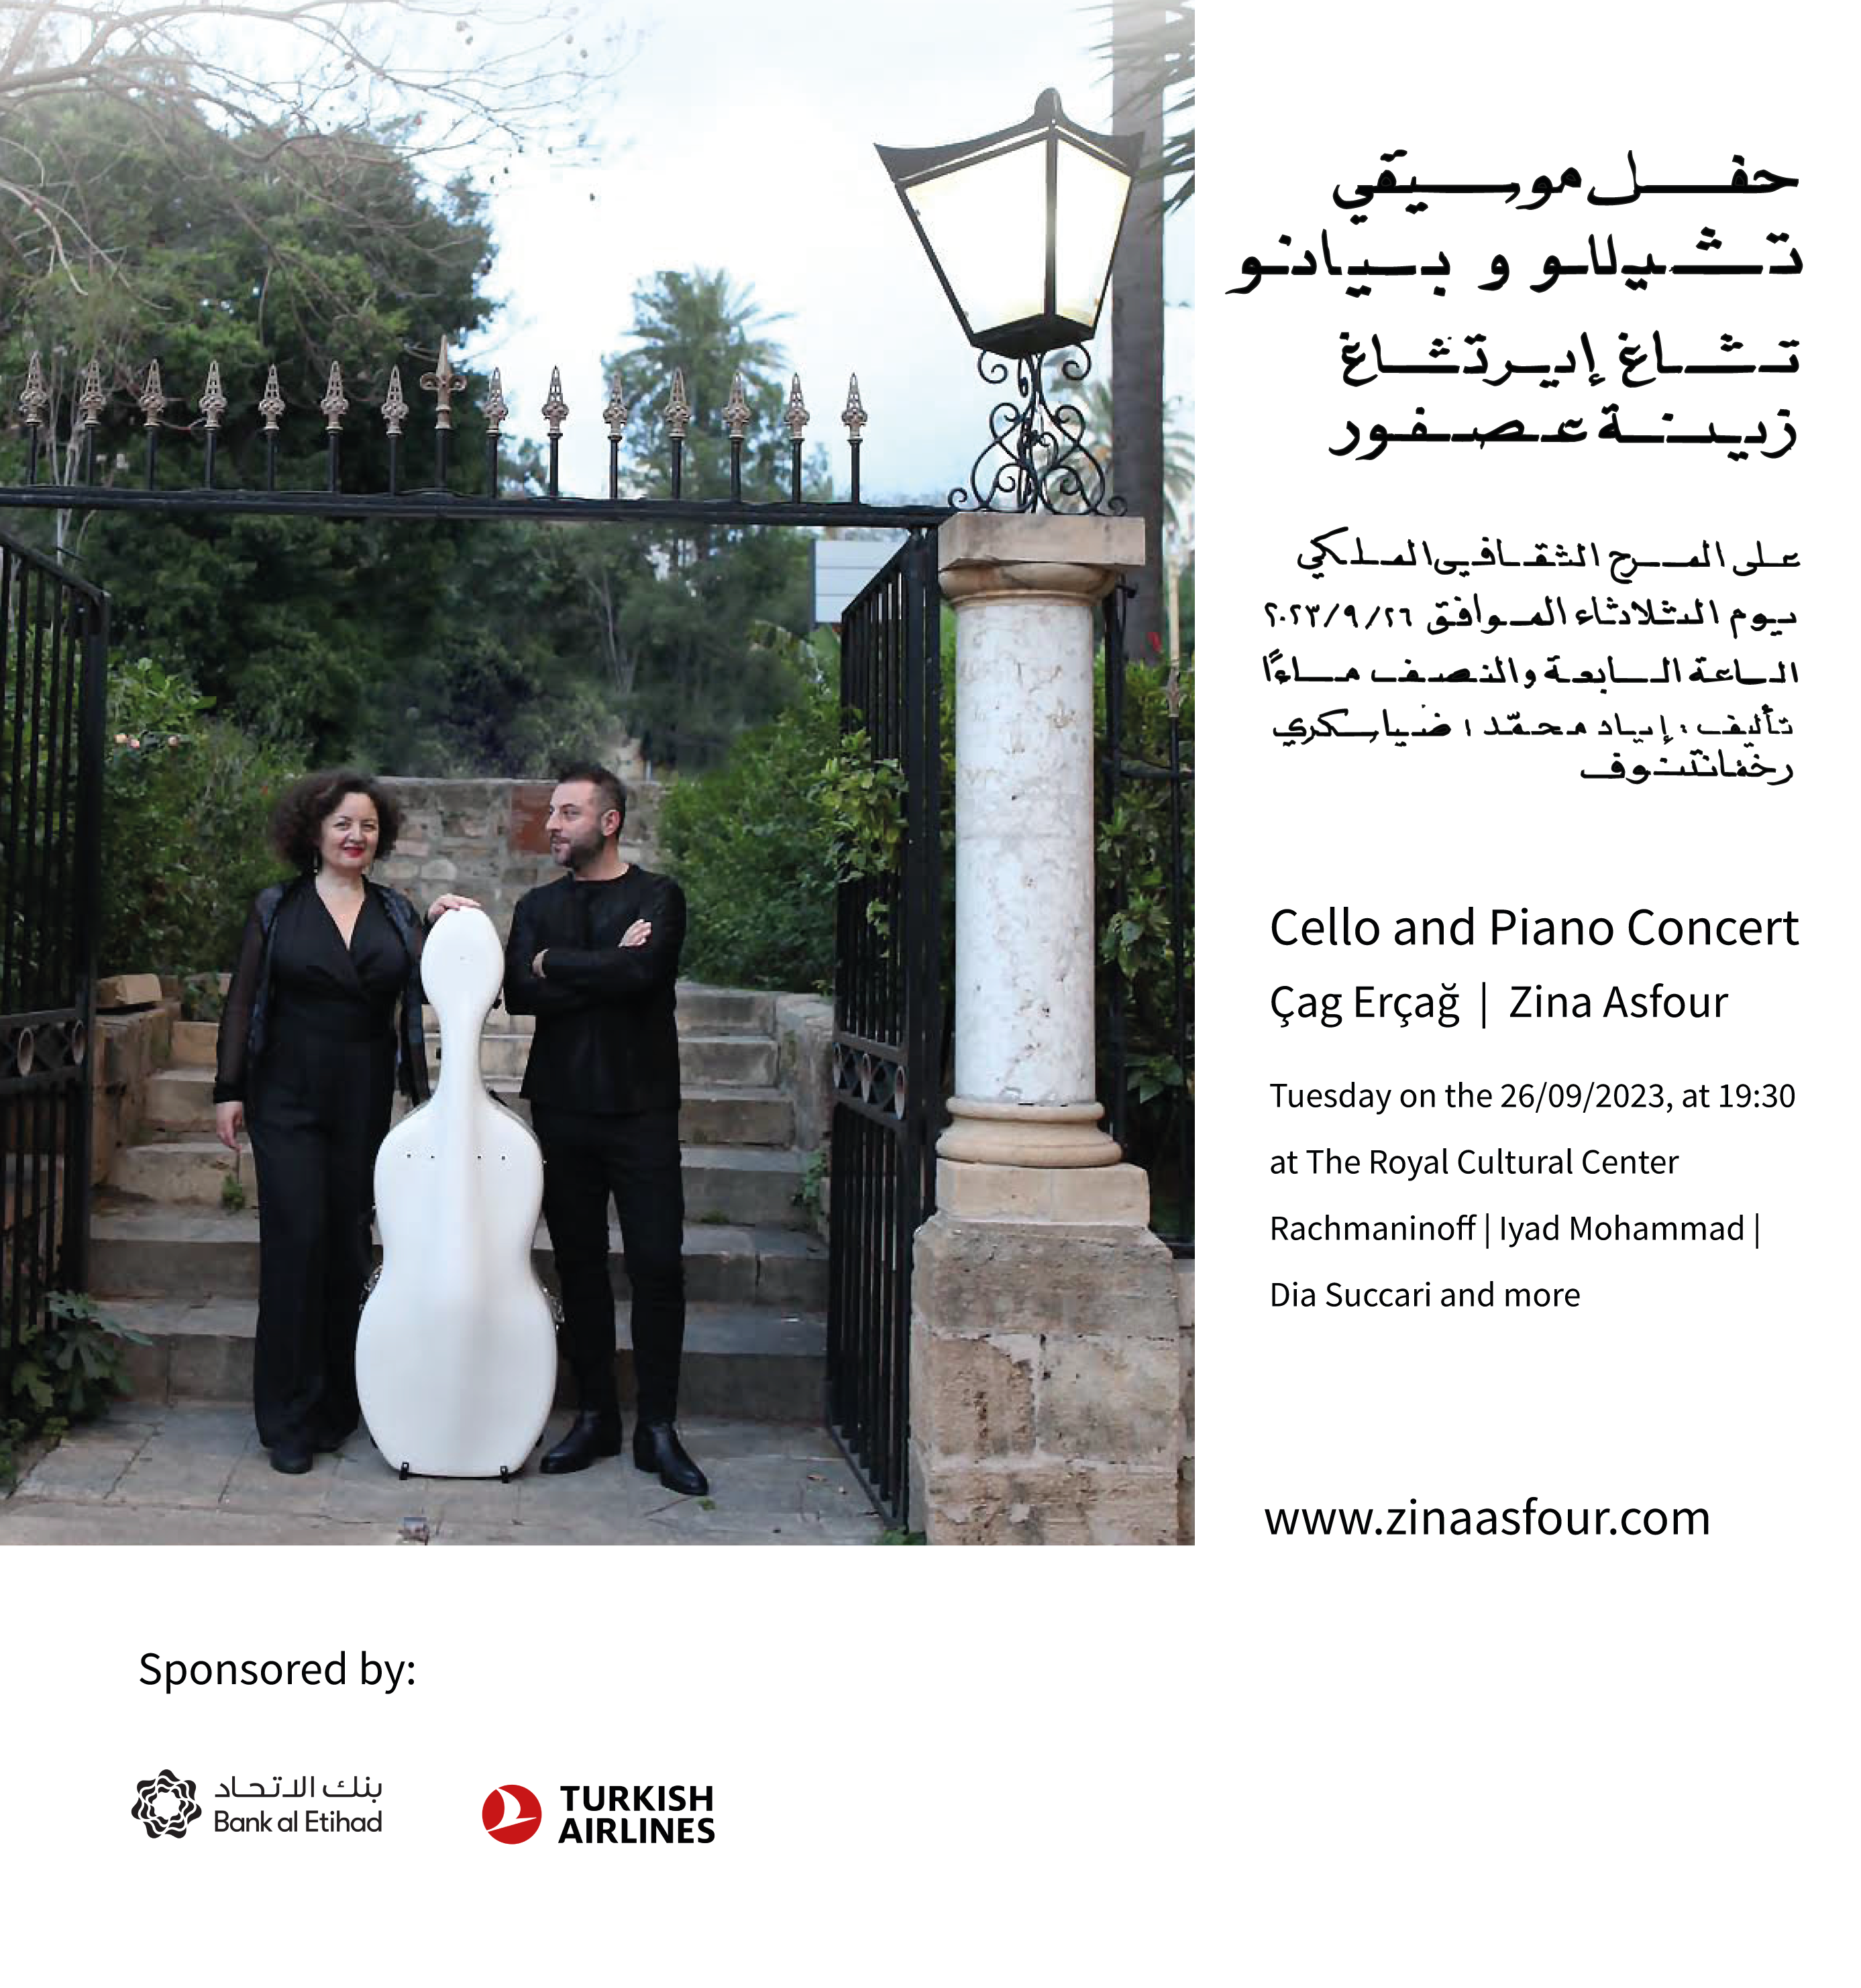 Cello And Piano Concert By Cag Ercag And Zina Asfour